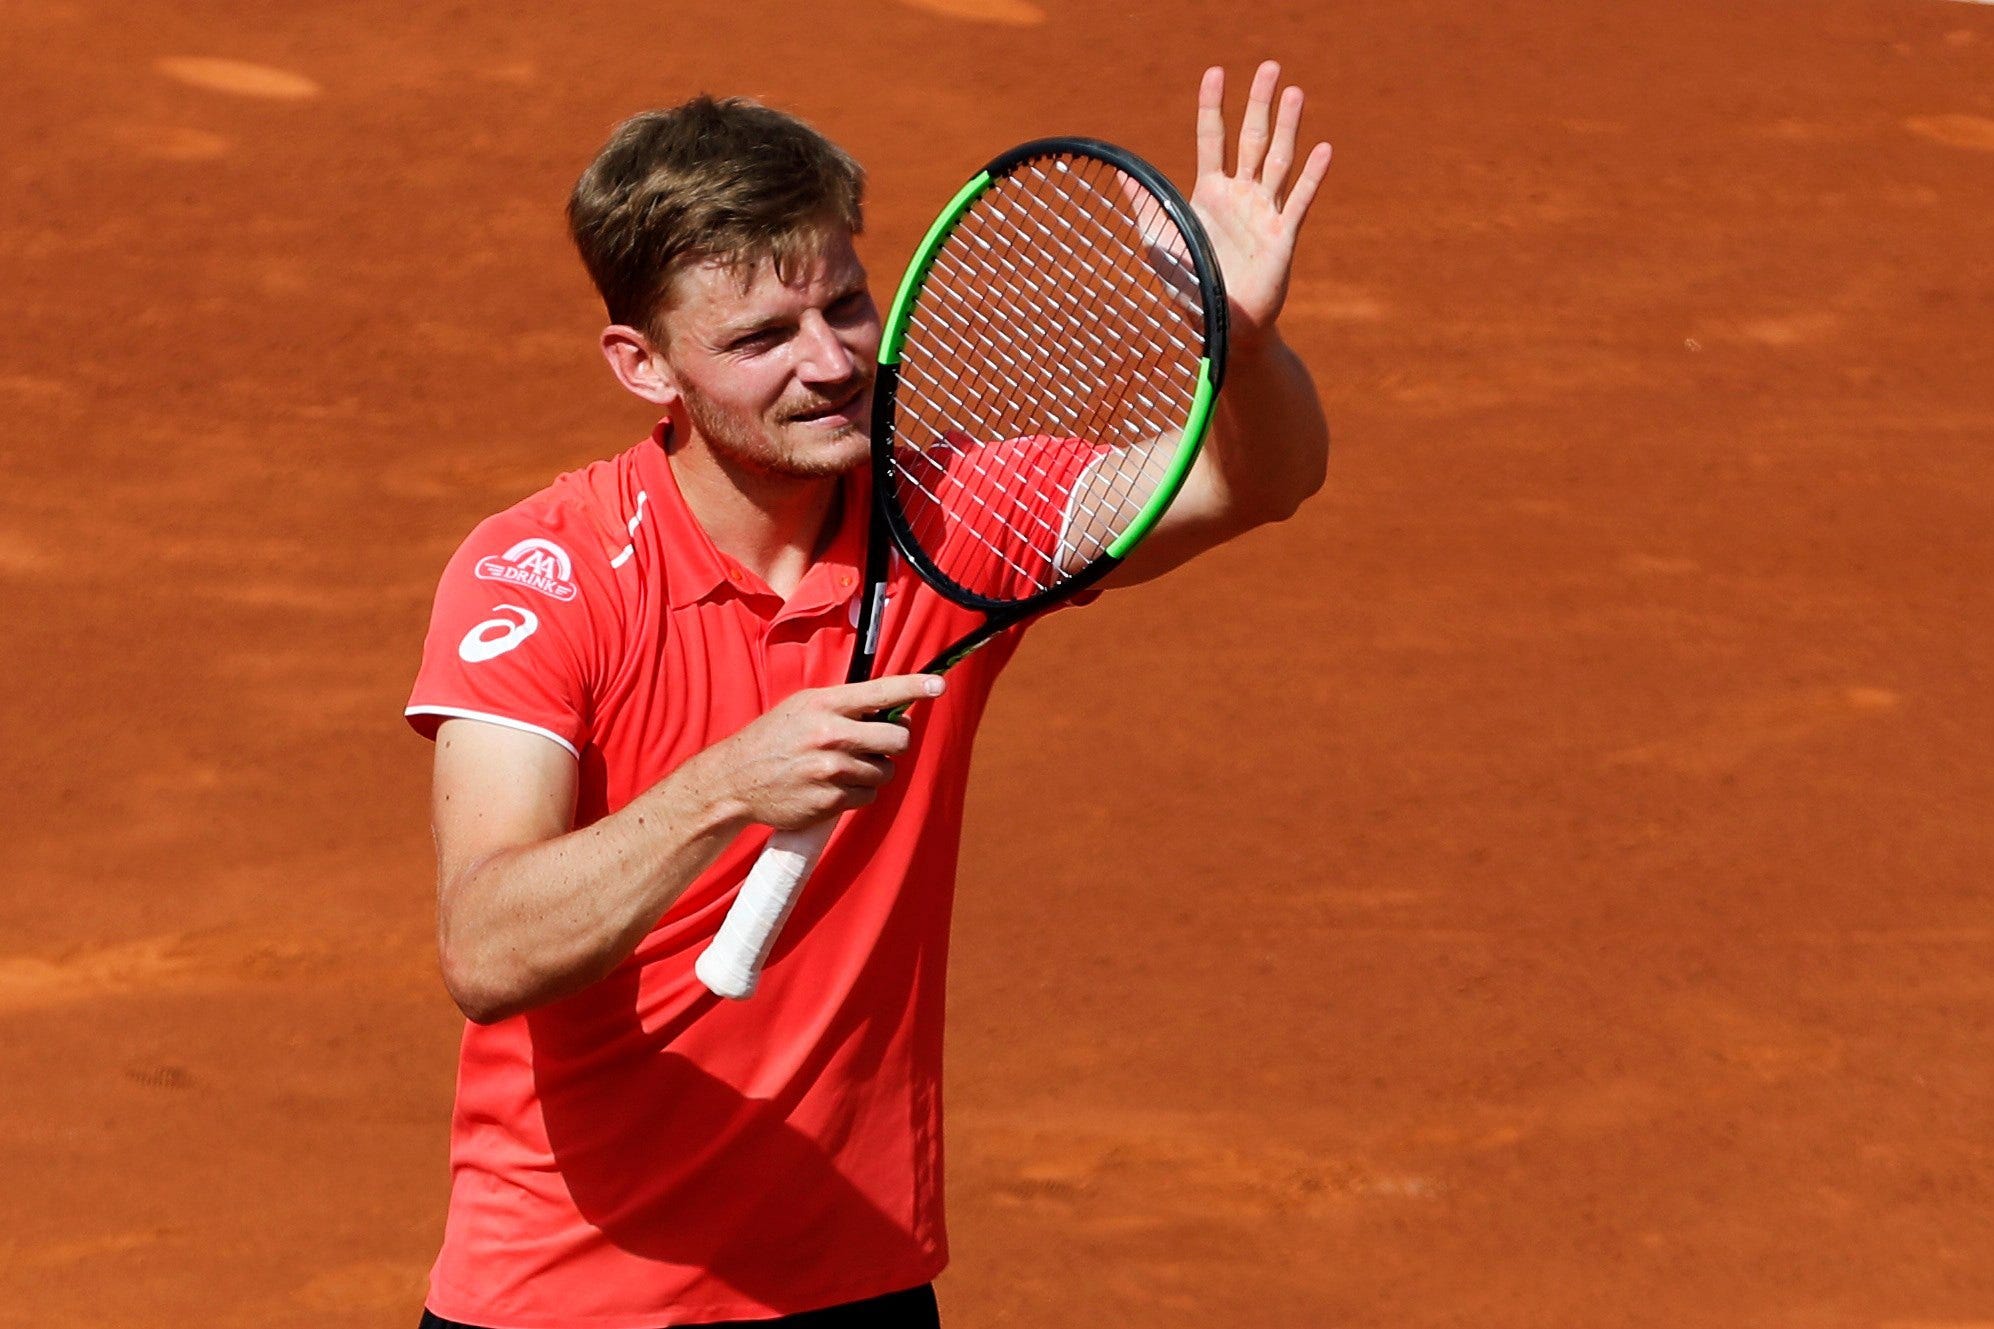 David Goffin defeats Marcel Granollers in second round of Barcelona Open